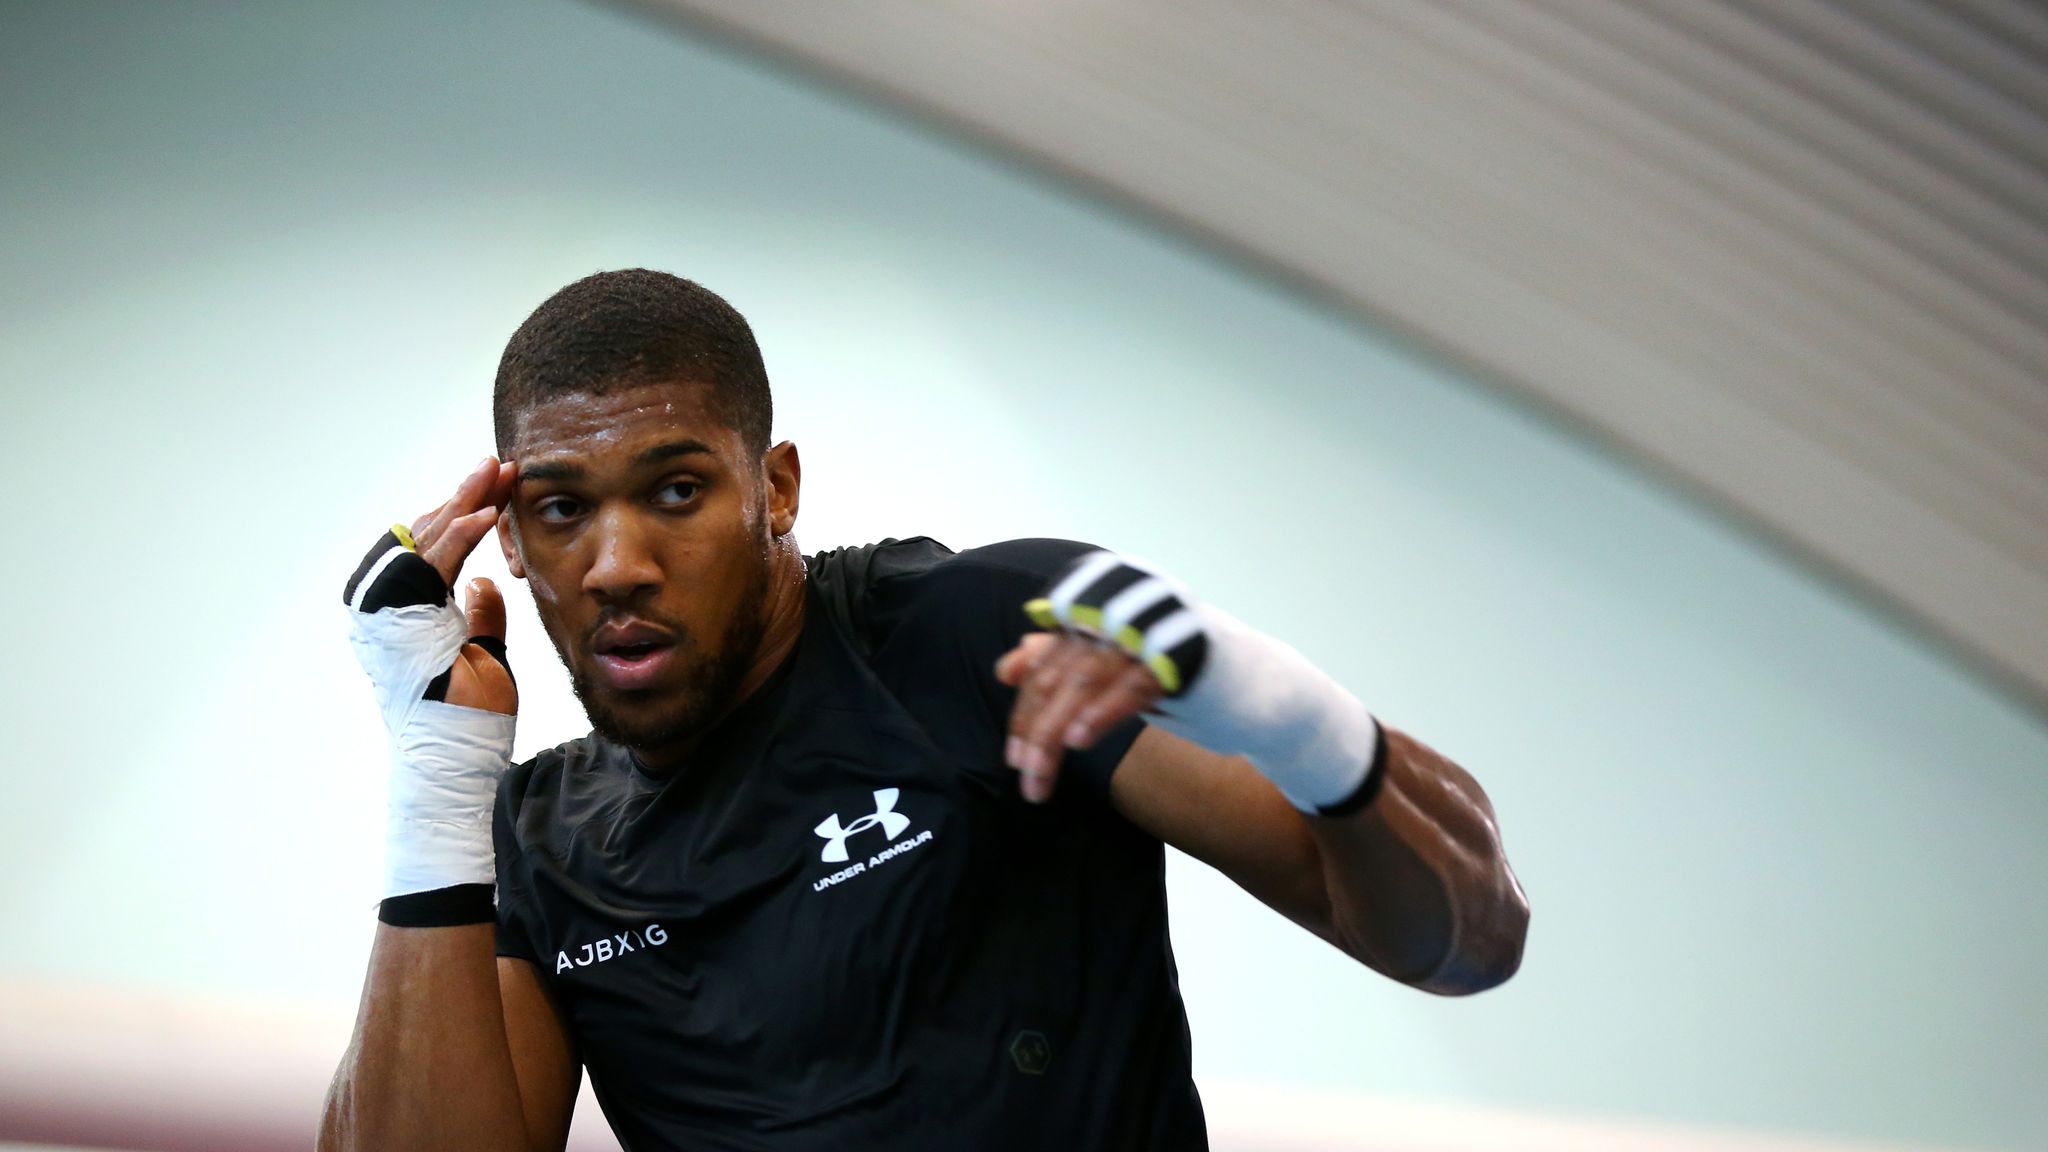 aj boxing under armour